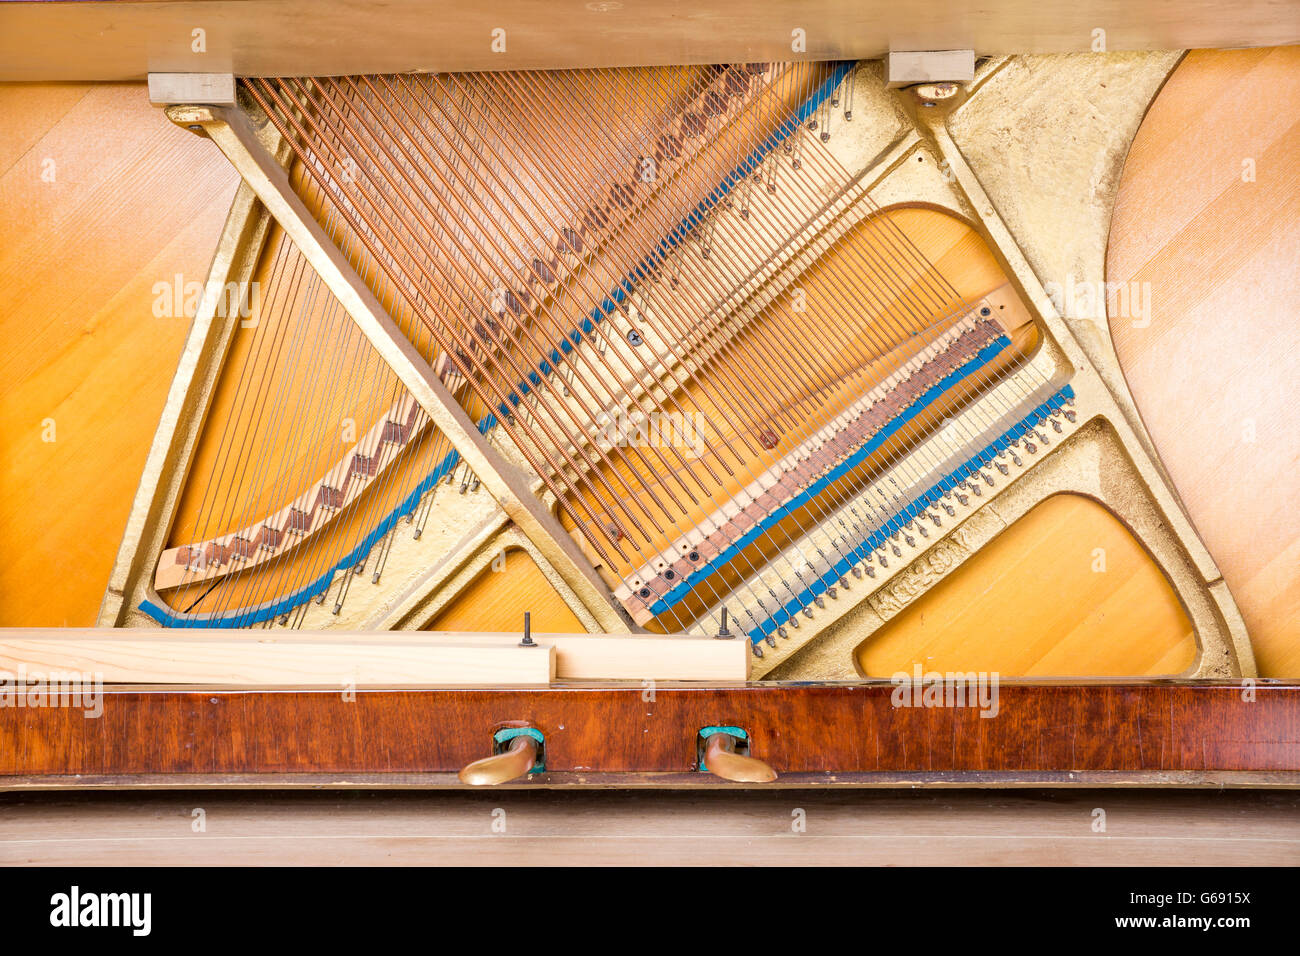 Bottom structure of an upright piano: pedals, metal frame with strings, bass and treble bridges. Stock Photo